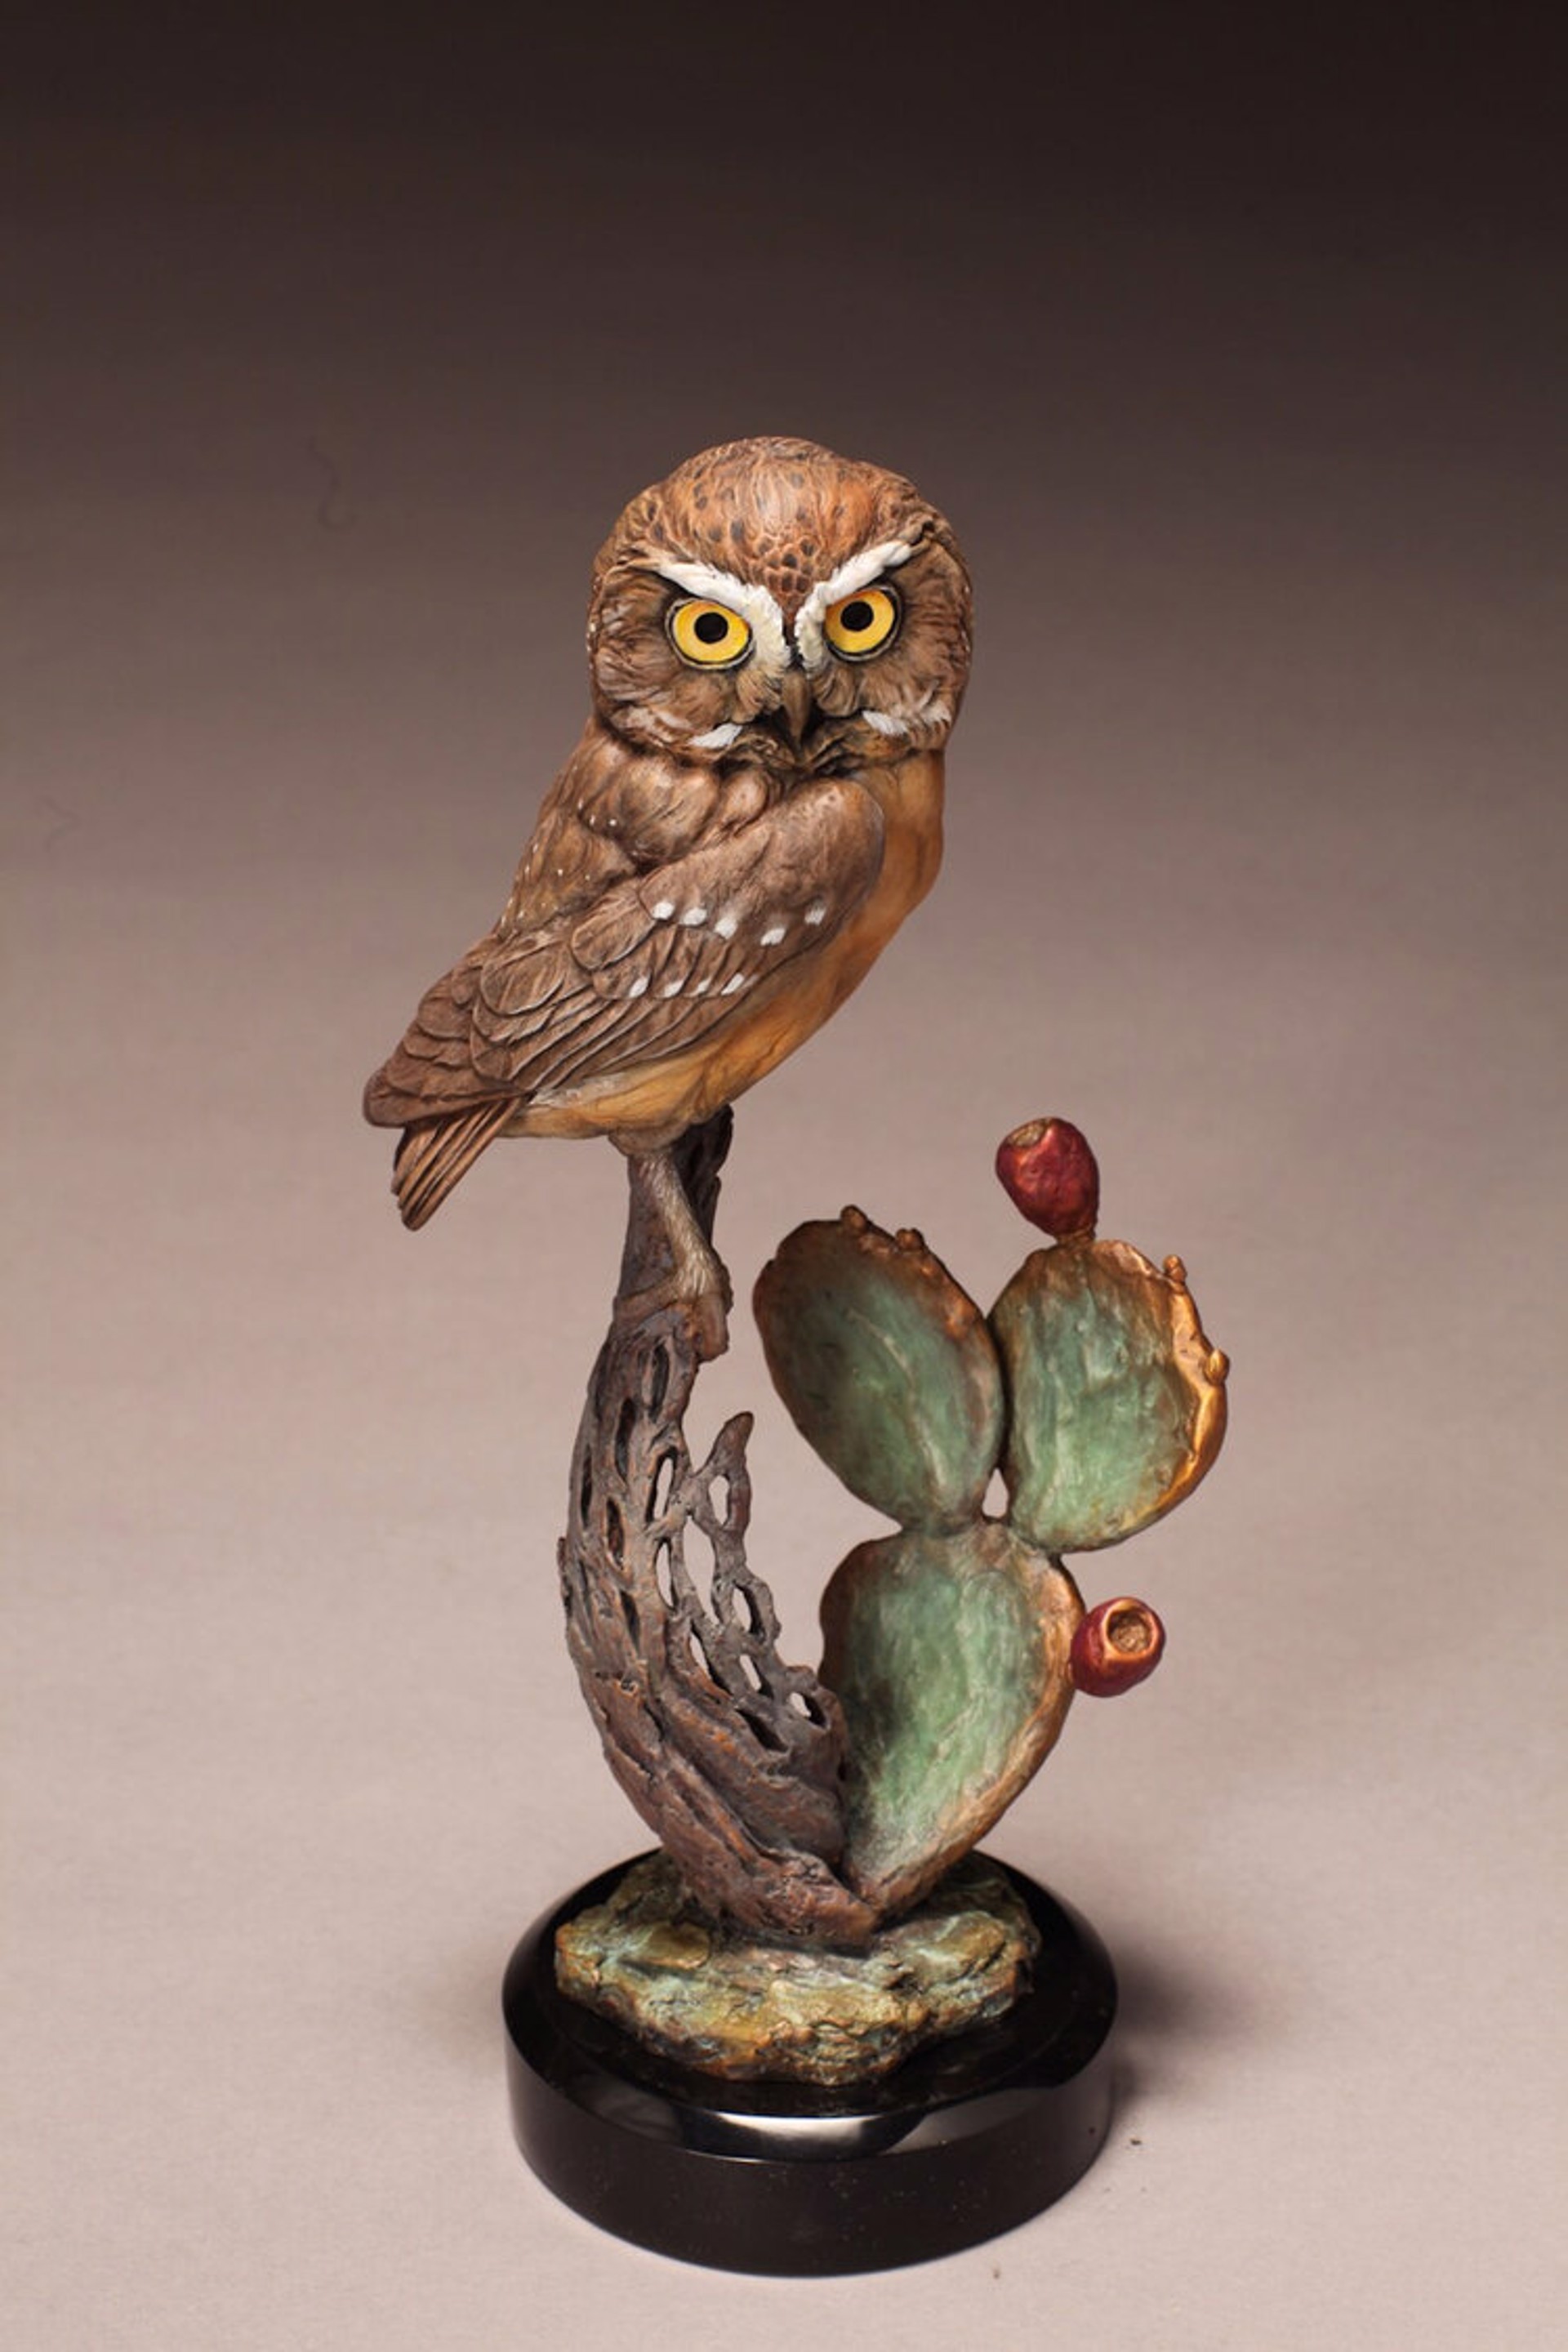 Elf Owl on Ocotillo (Edition of 48) by Eugene Morelli